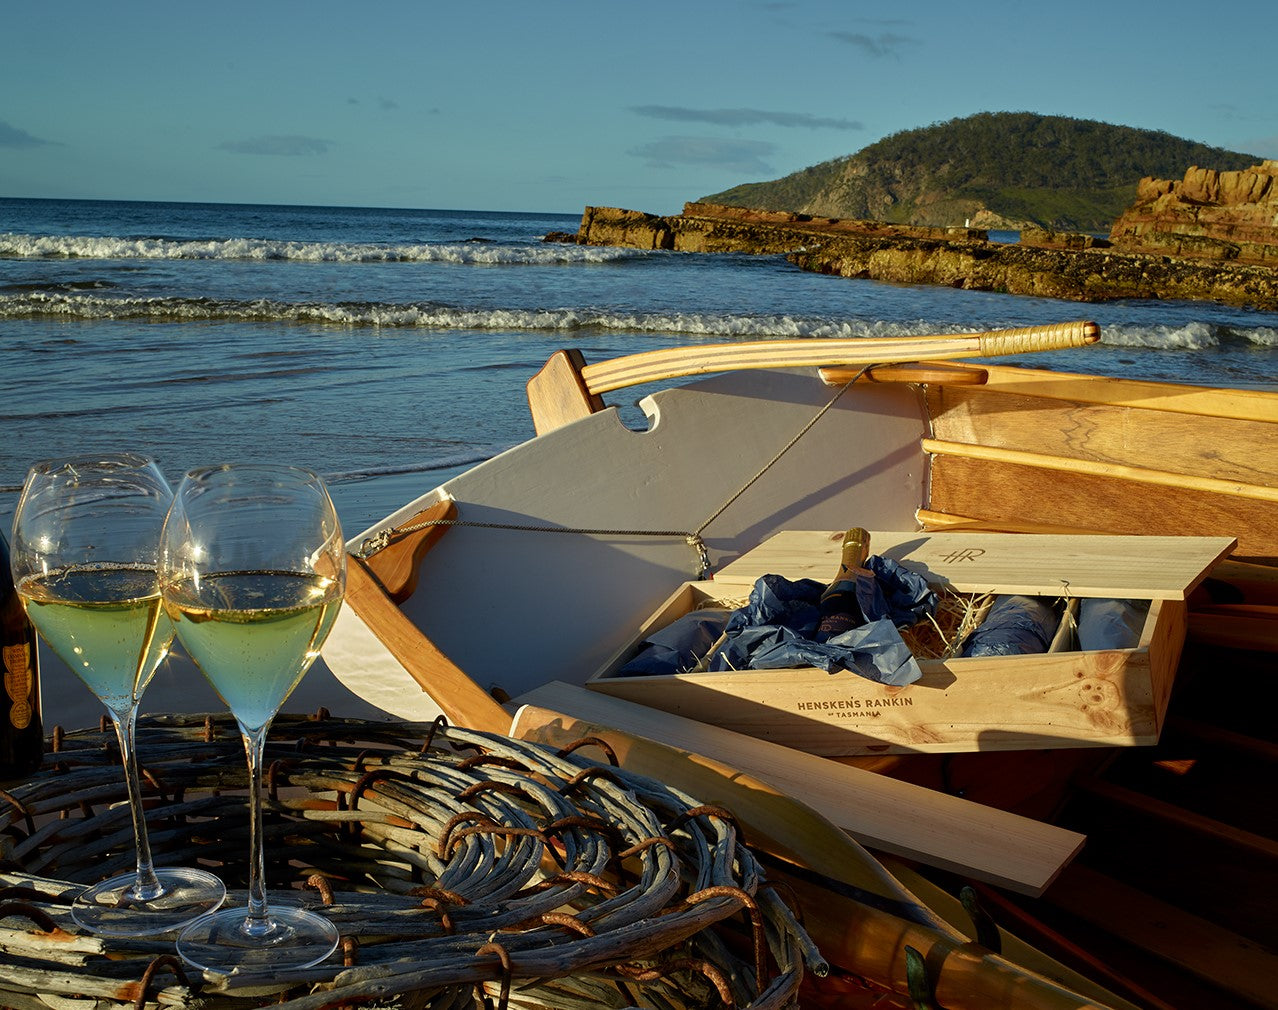 Wine glasses perched on a crayfish pot next to a boat with a crate of wine inside on a beach